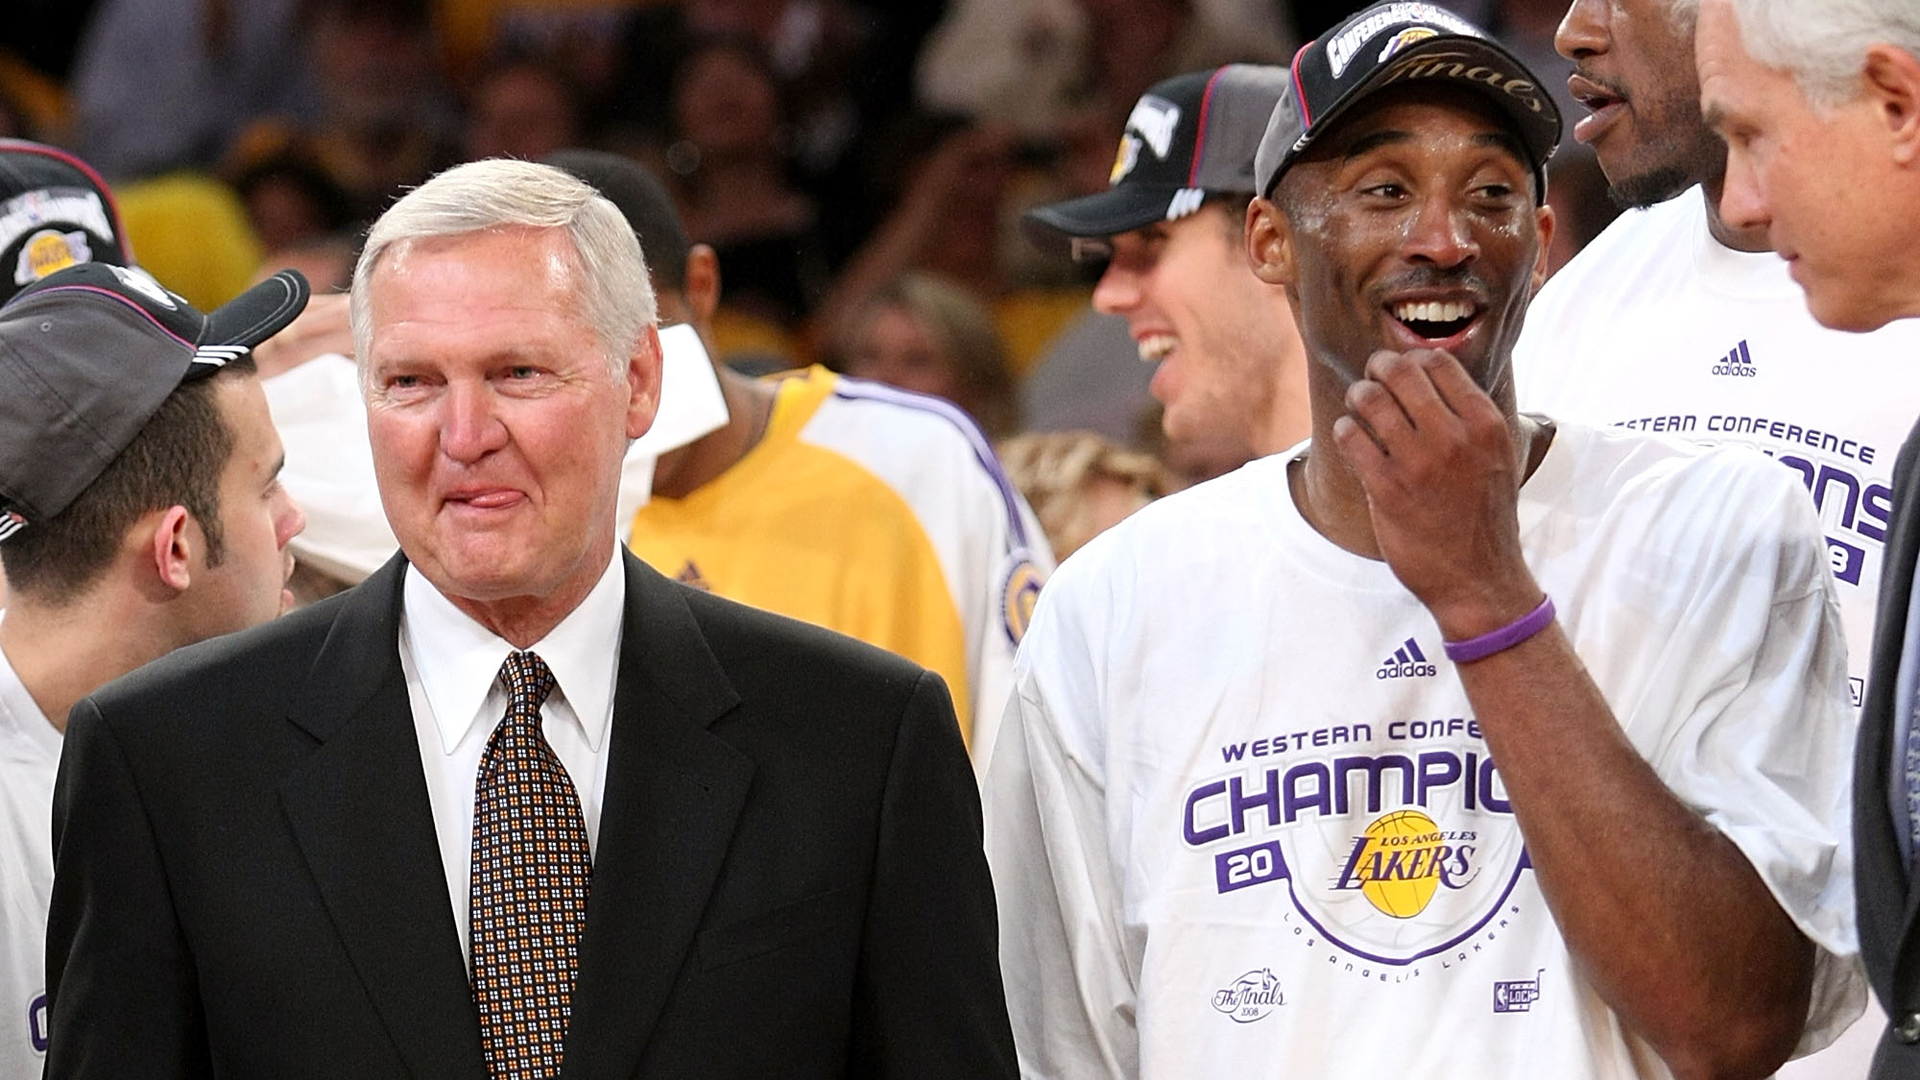 Two Years After Kobe's Death, Jerry West About the 'Shock and